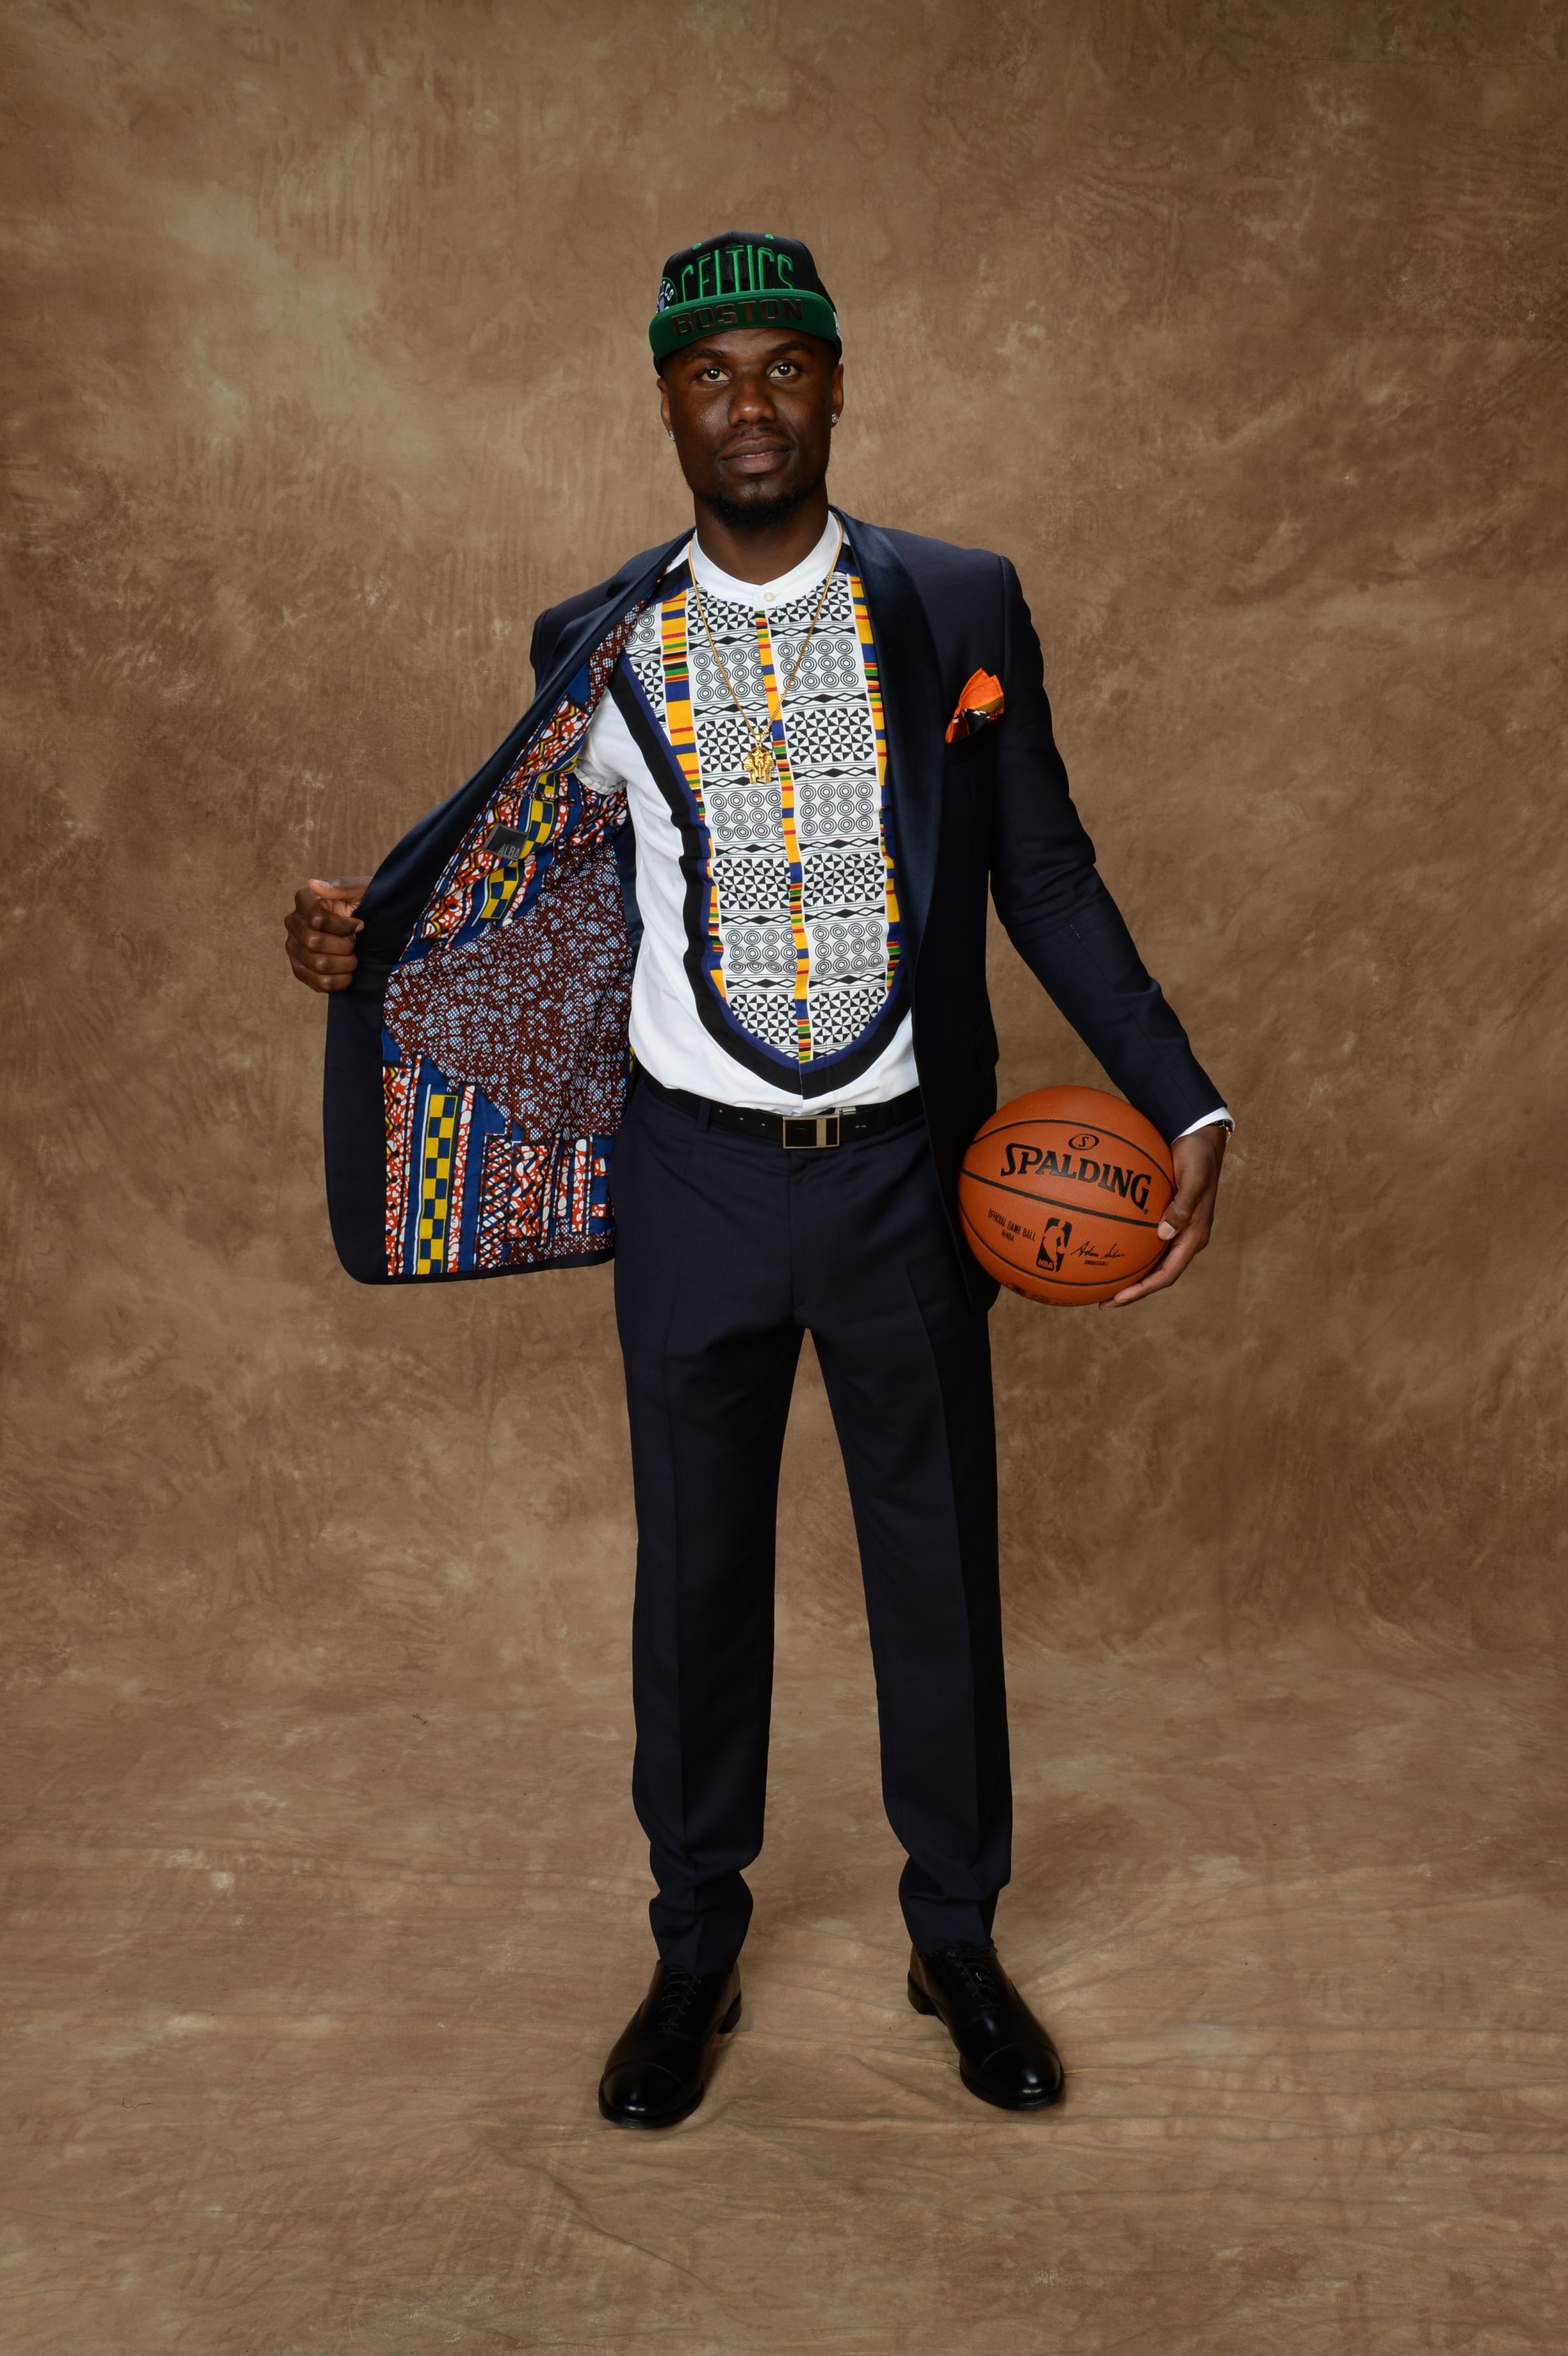 Ben Bentil's dapper suit and shirt came from Serge Ibaka's clothing line and paid homage to his homeland of Ghana.